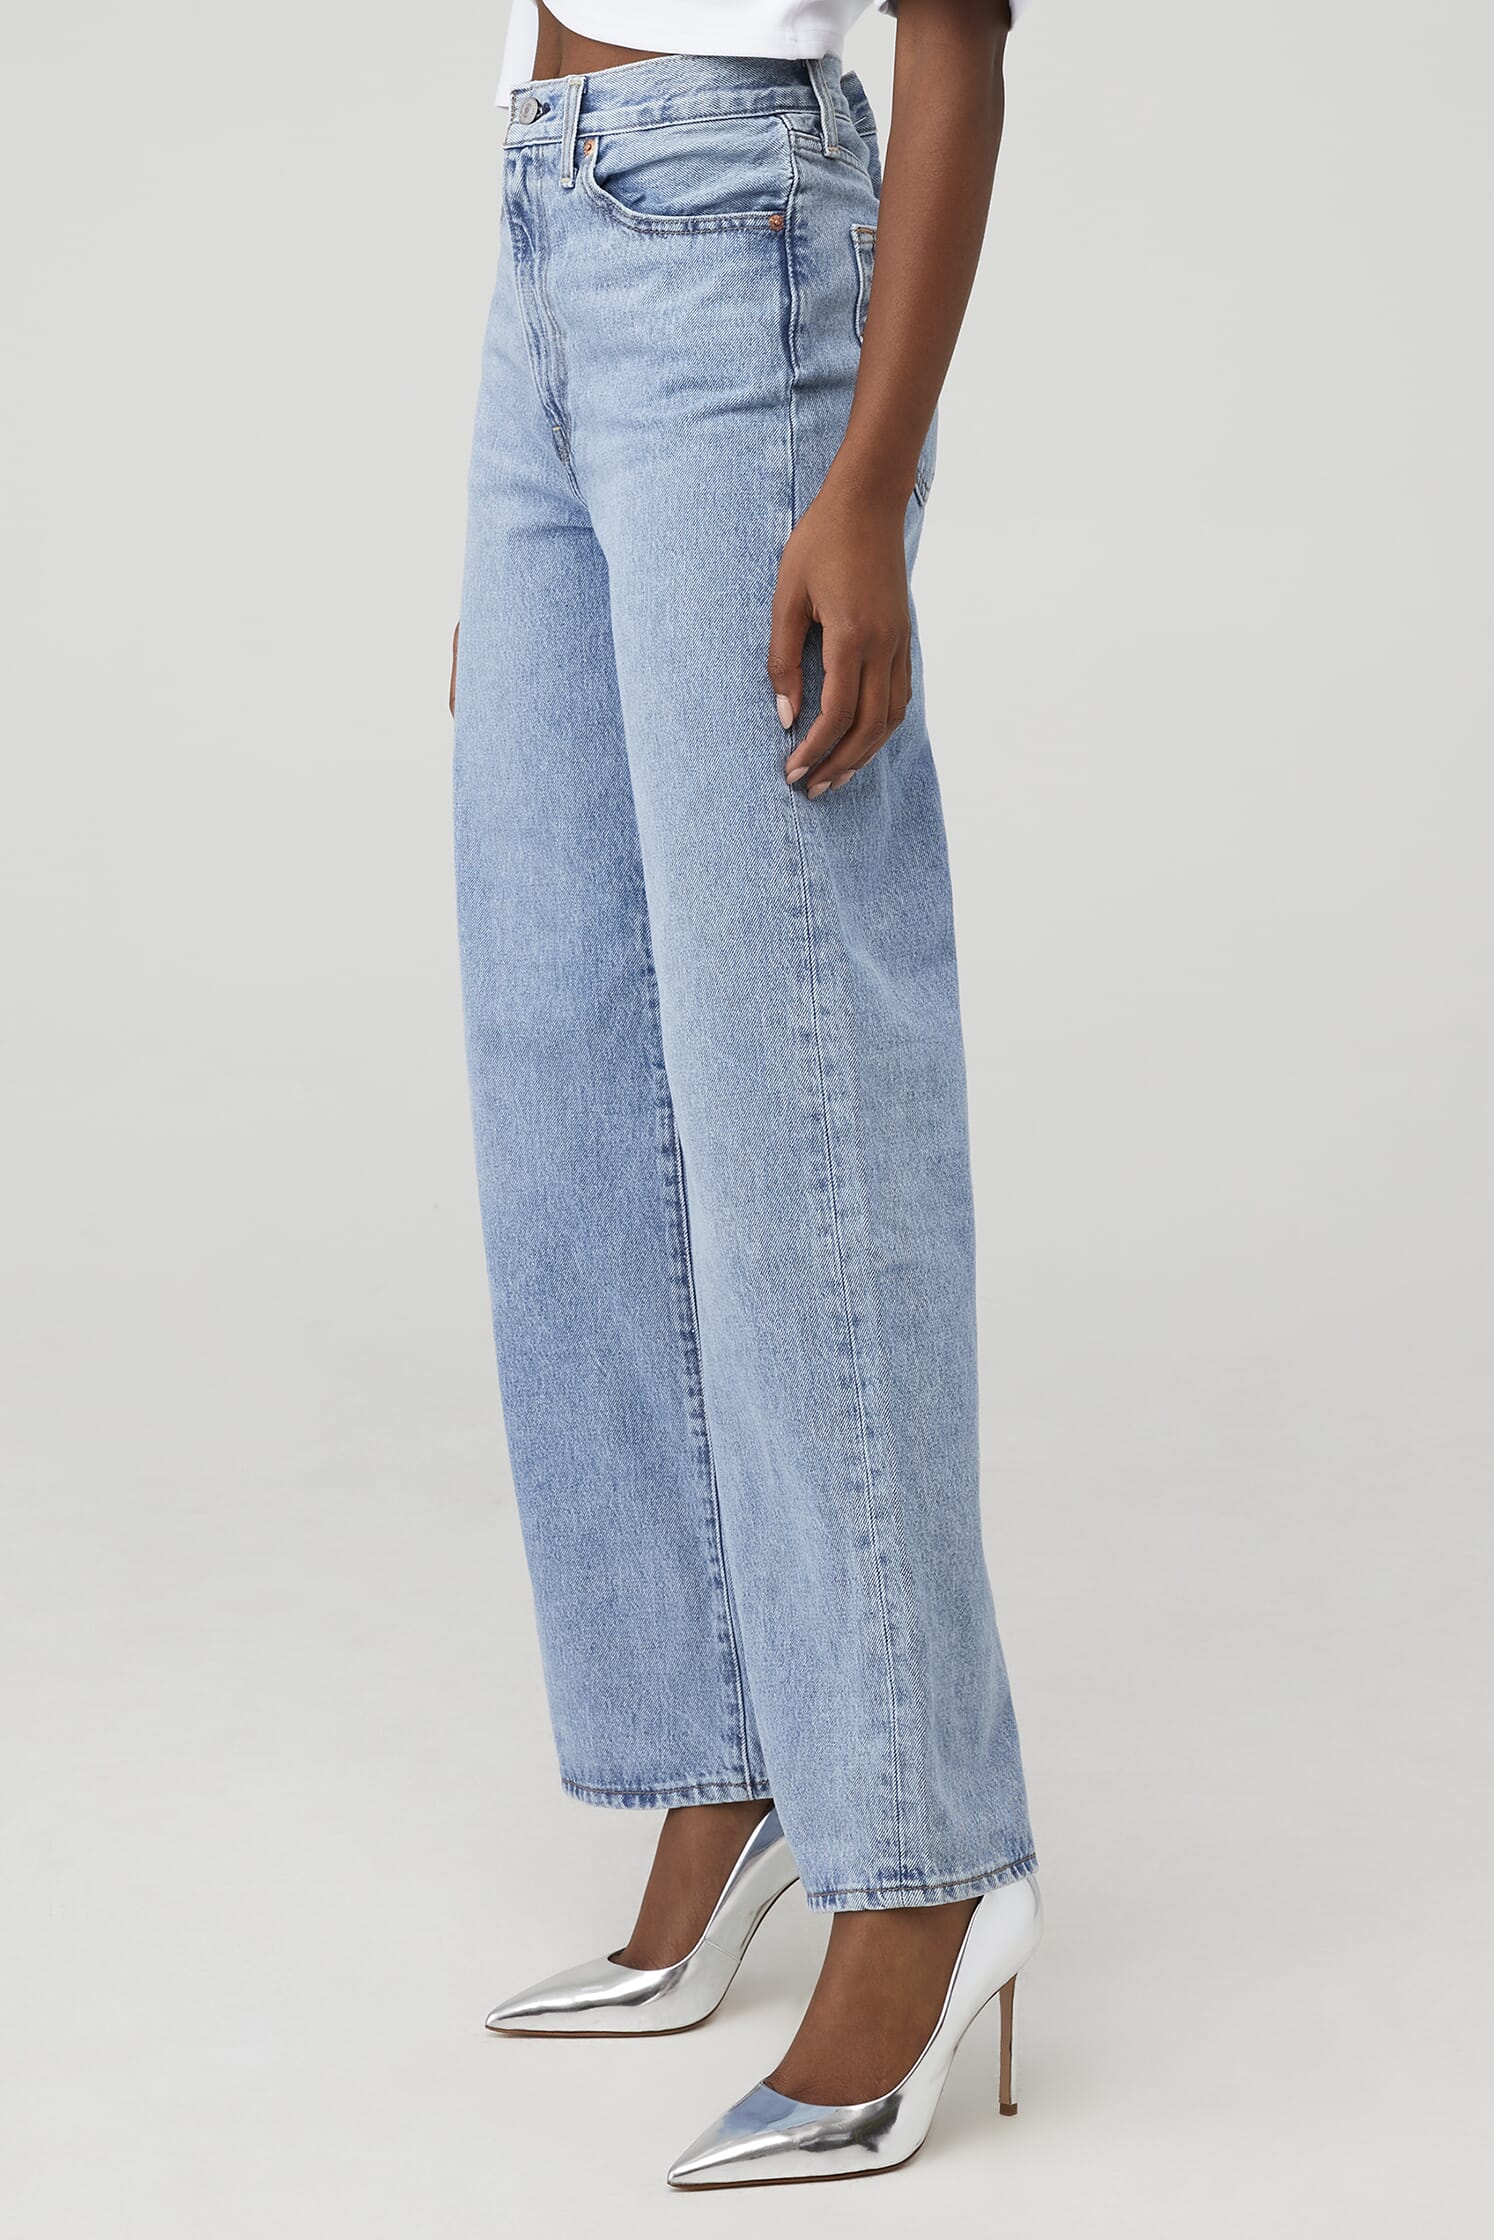 LEVI'S | Ribcage Wide Leg in Far And Wide| FashionPass